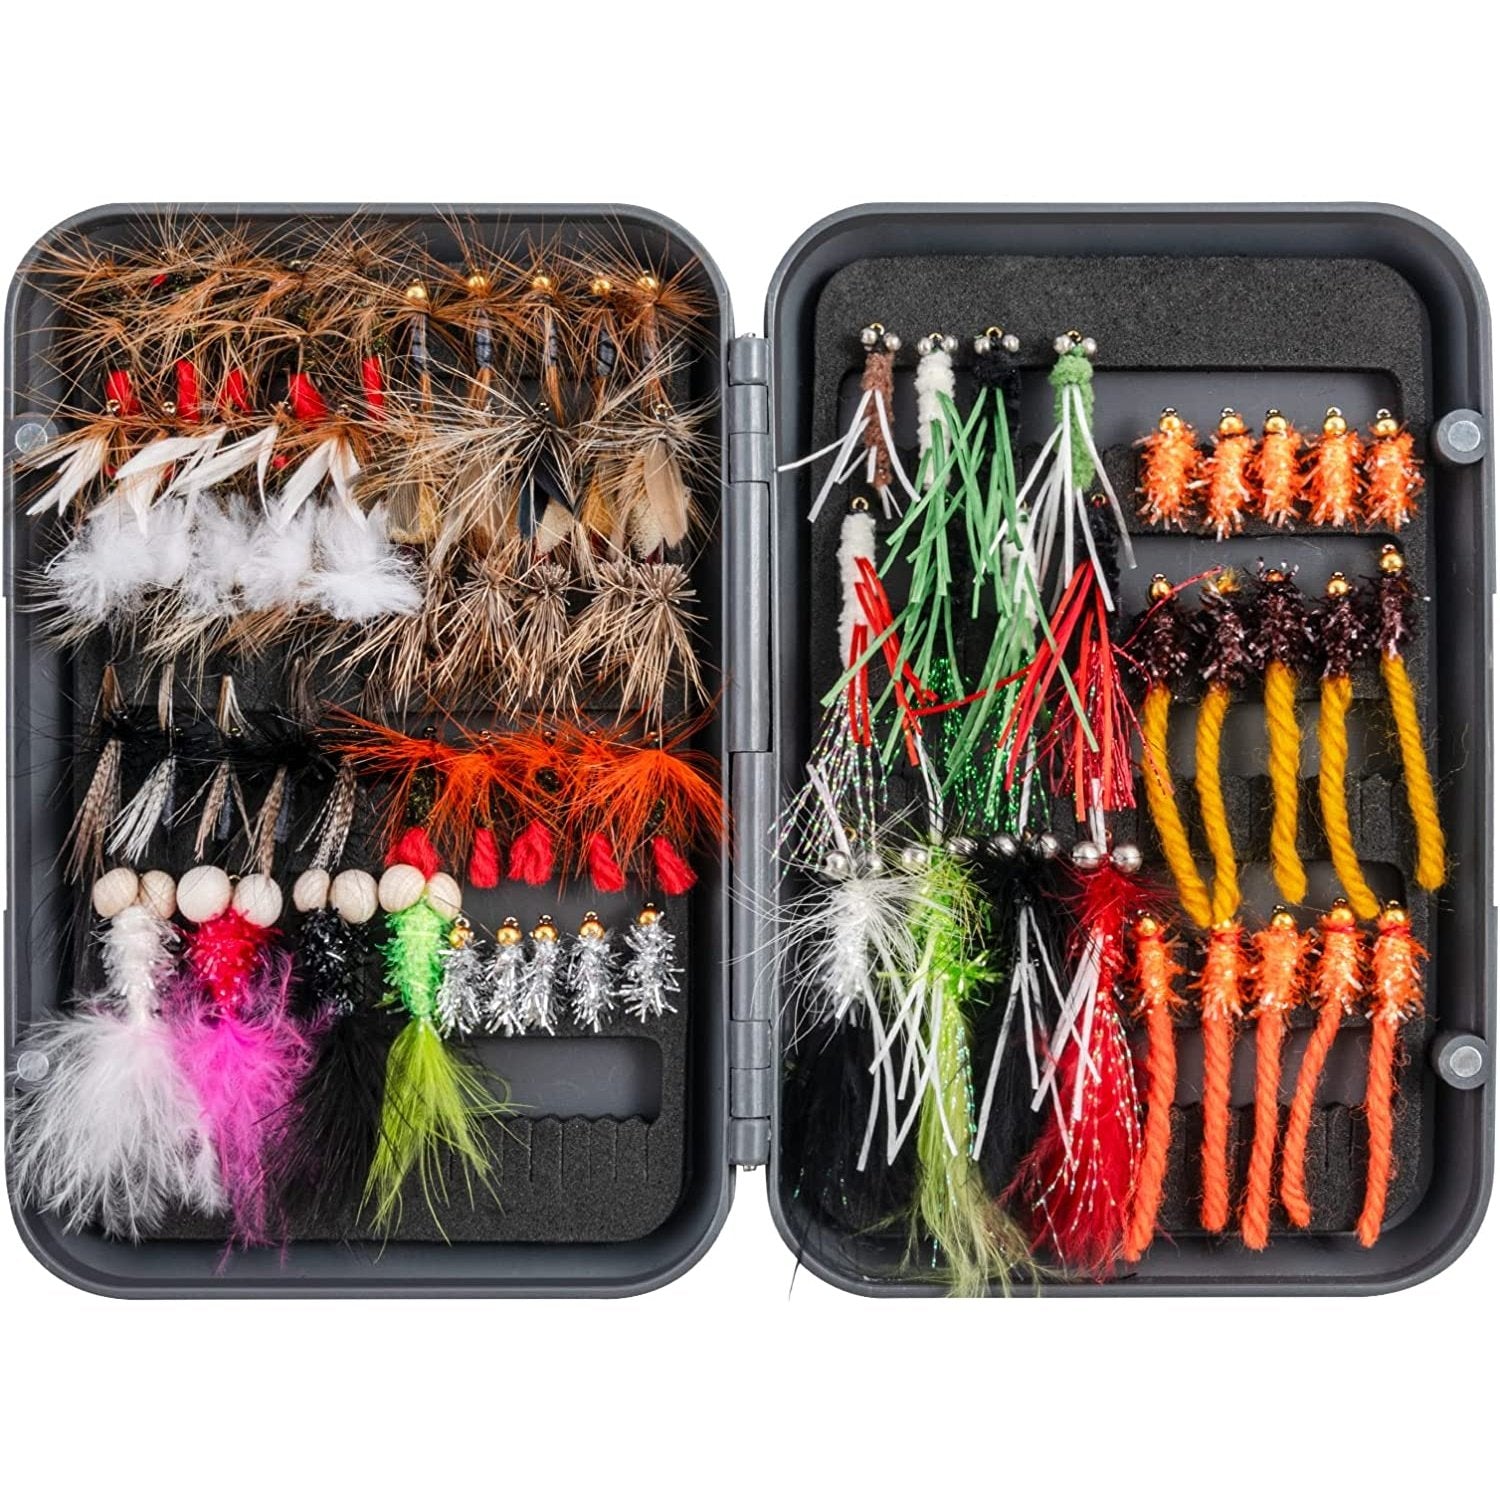 Goture Fly Fishing Flies Lures Kit with Fly Box for Bass Trout